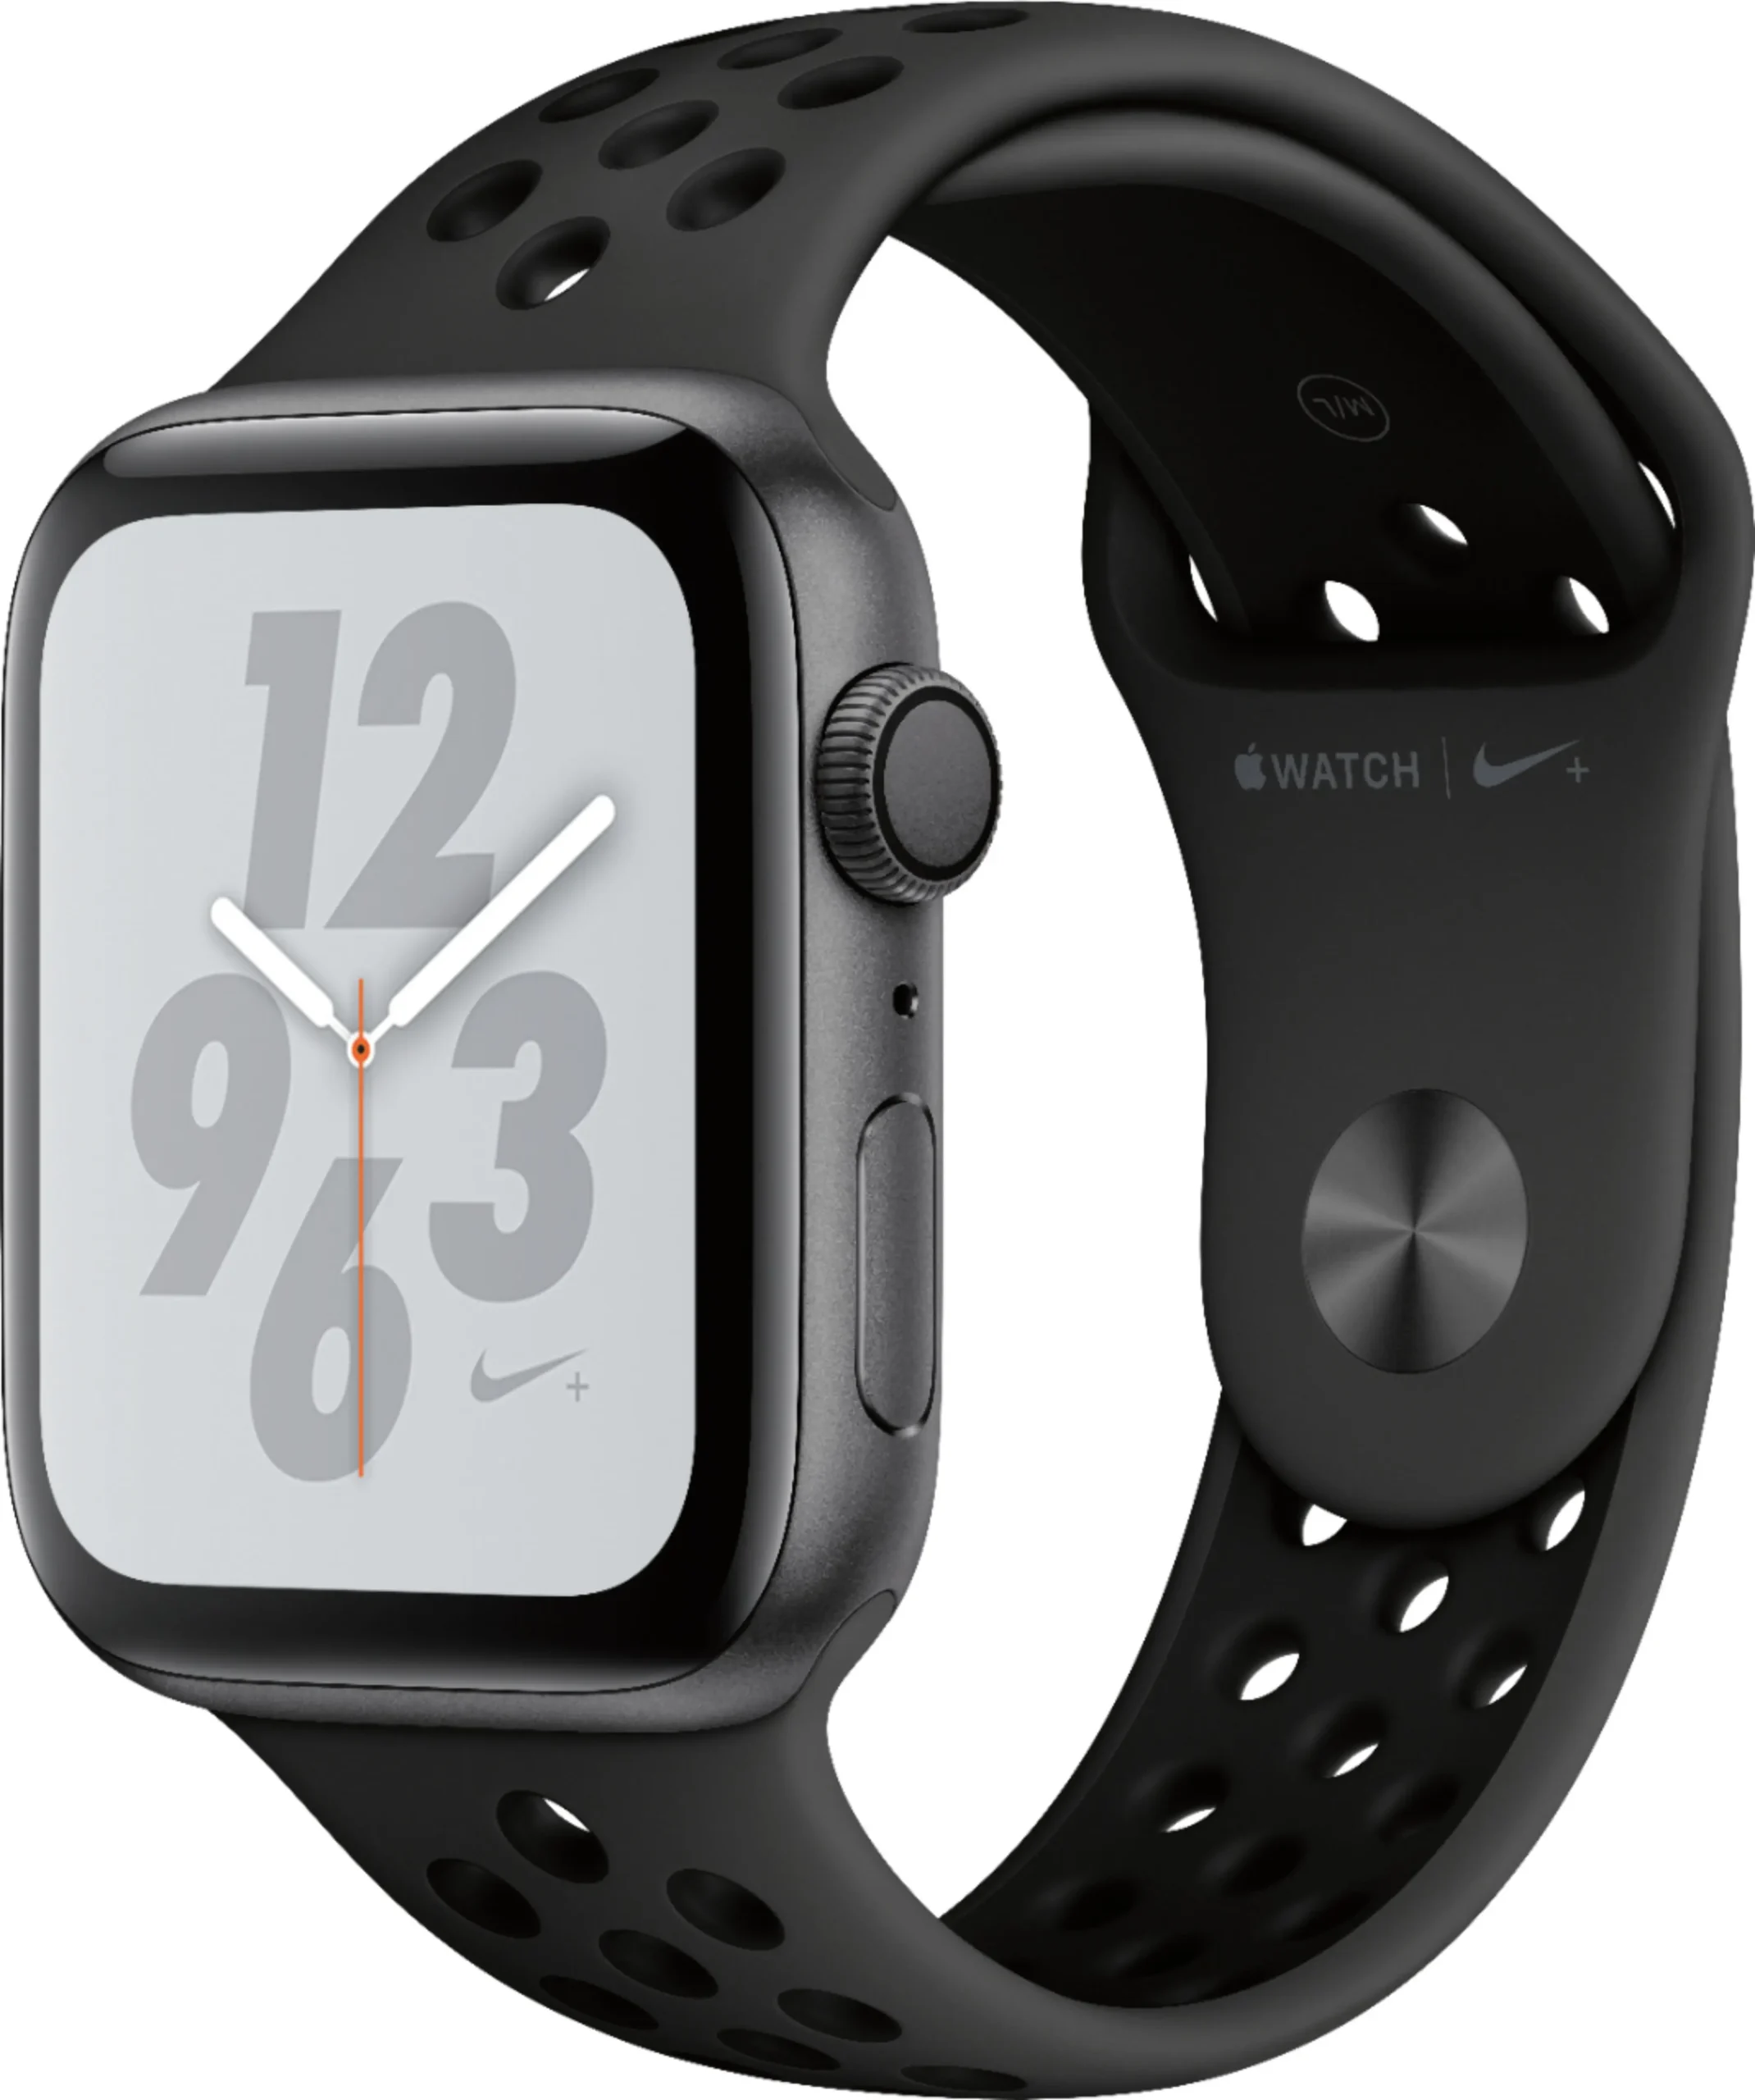 inteligente space gray aluminum black a1978 - What series is Apple Watch model A1978